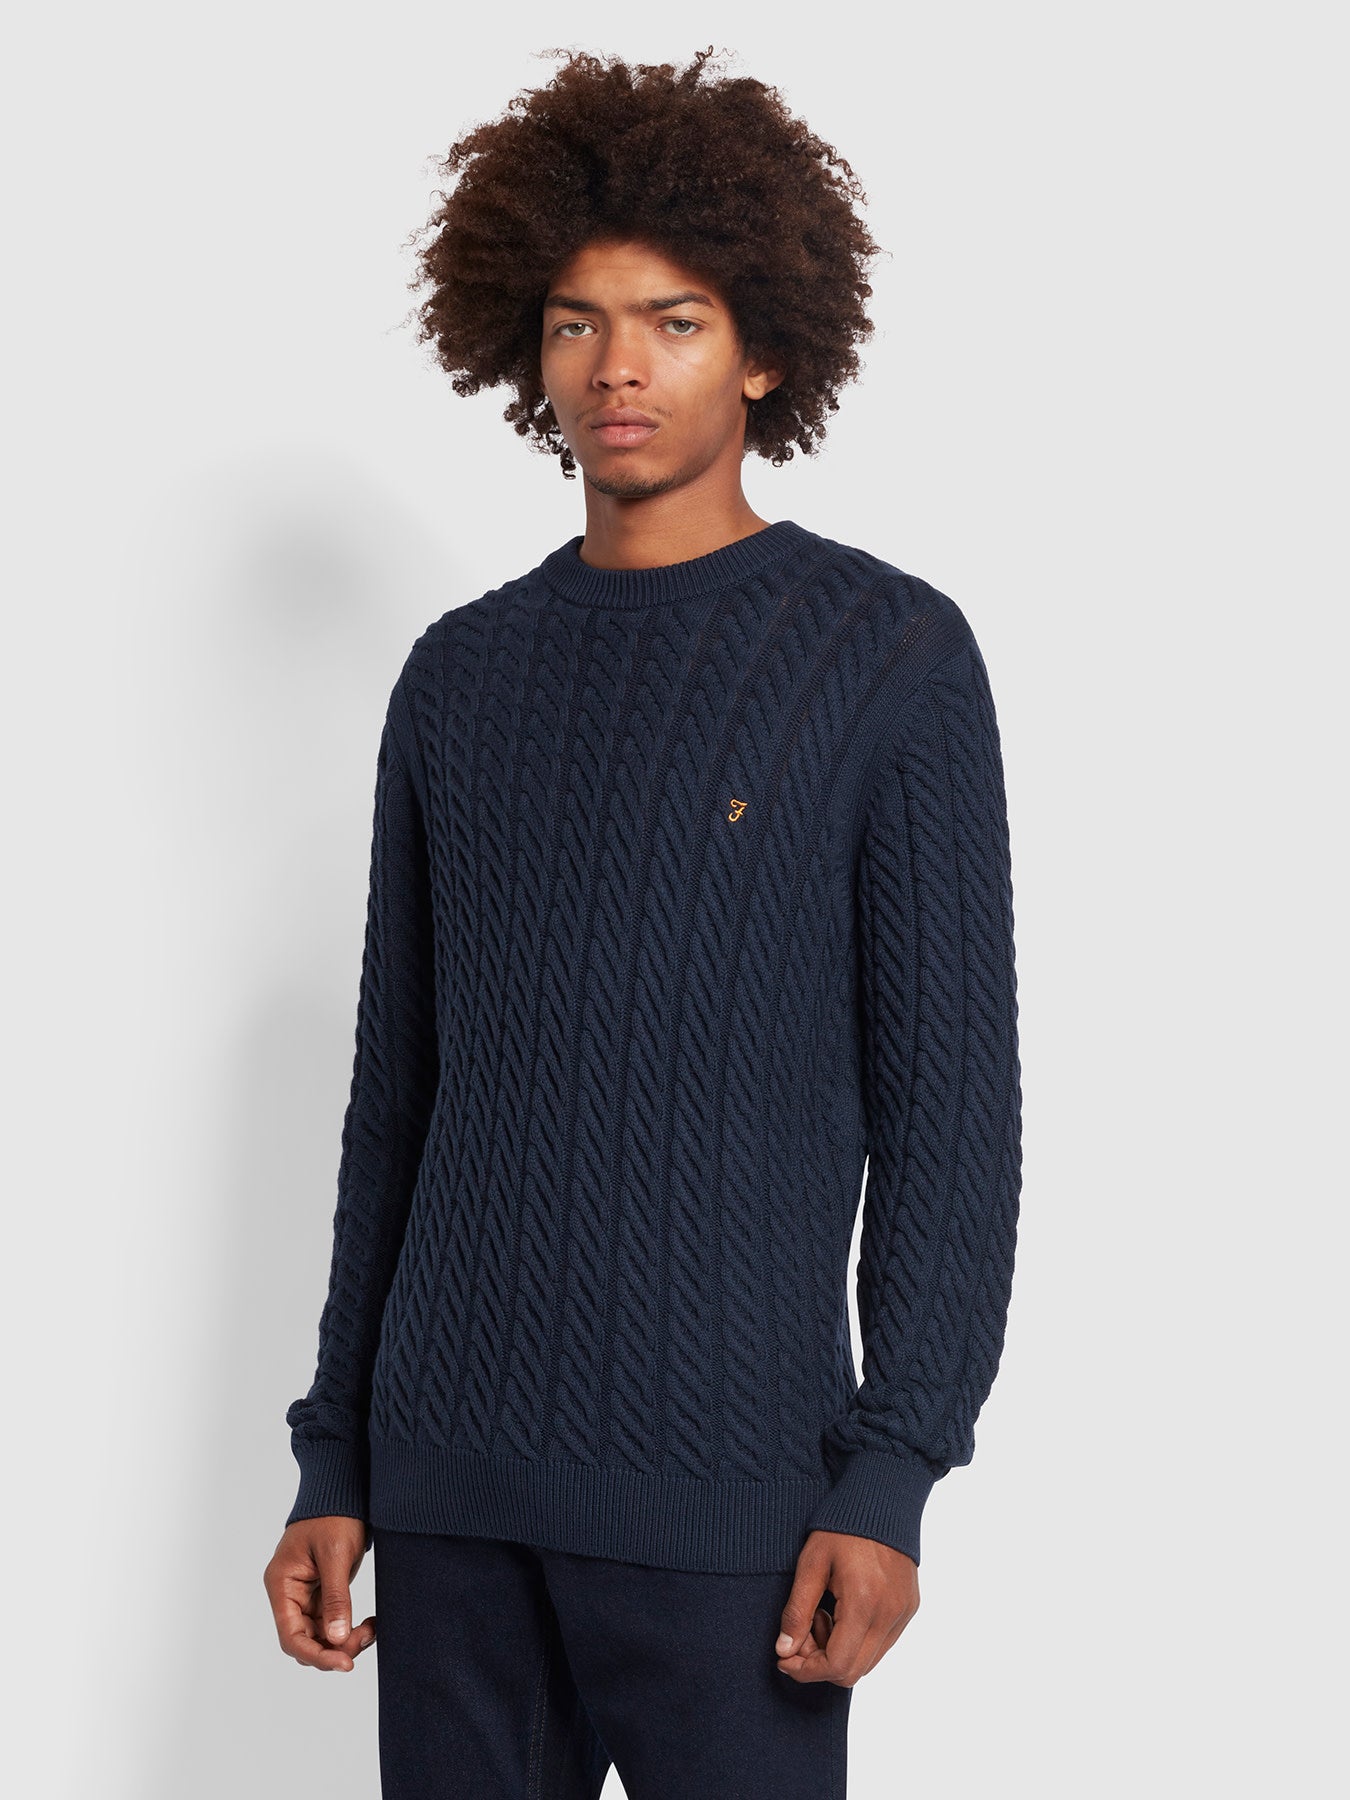 View Aspo Slim Fit Cable Knit Jumper In True Navy information